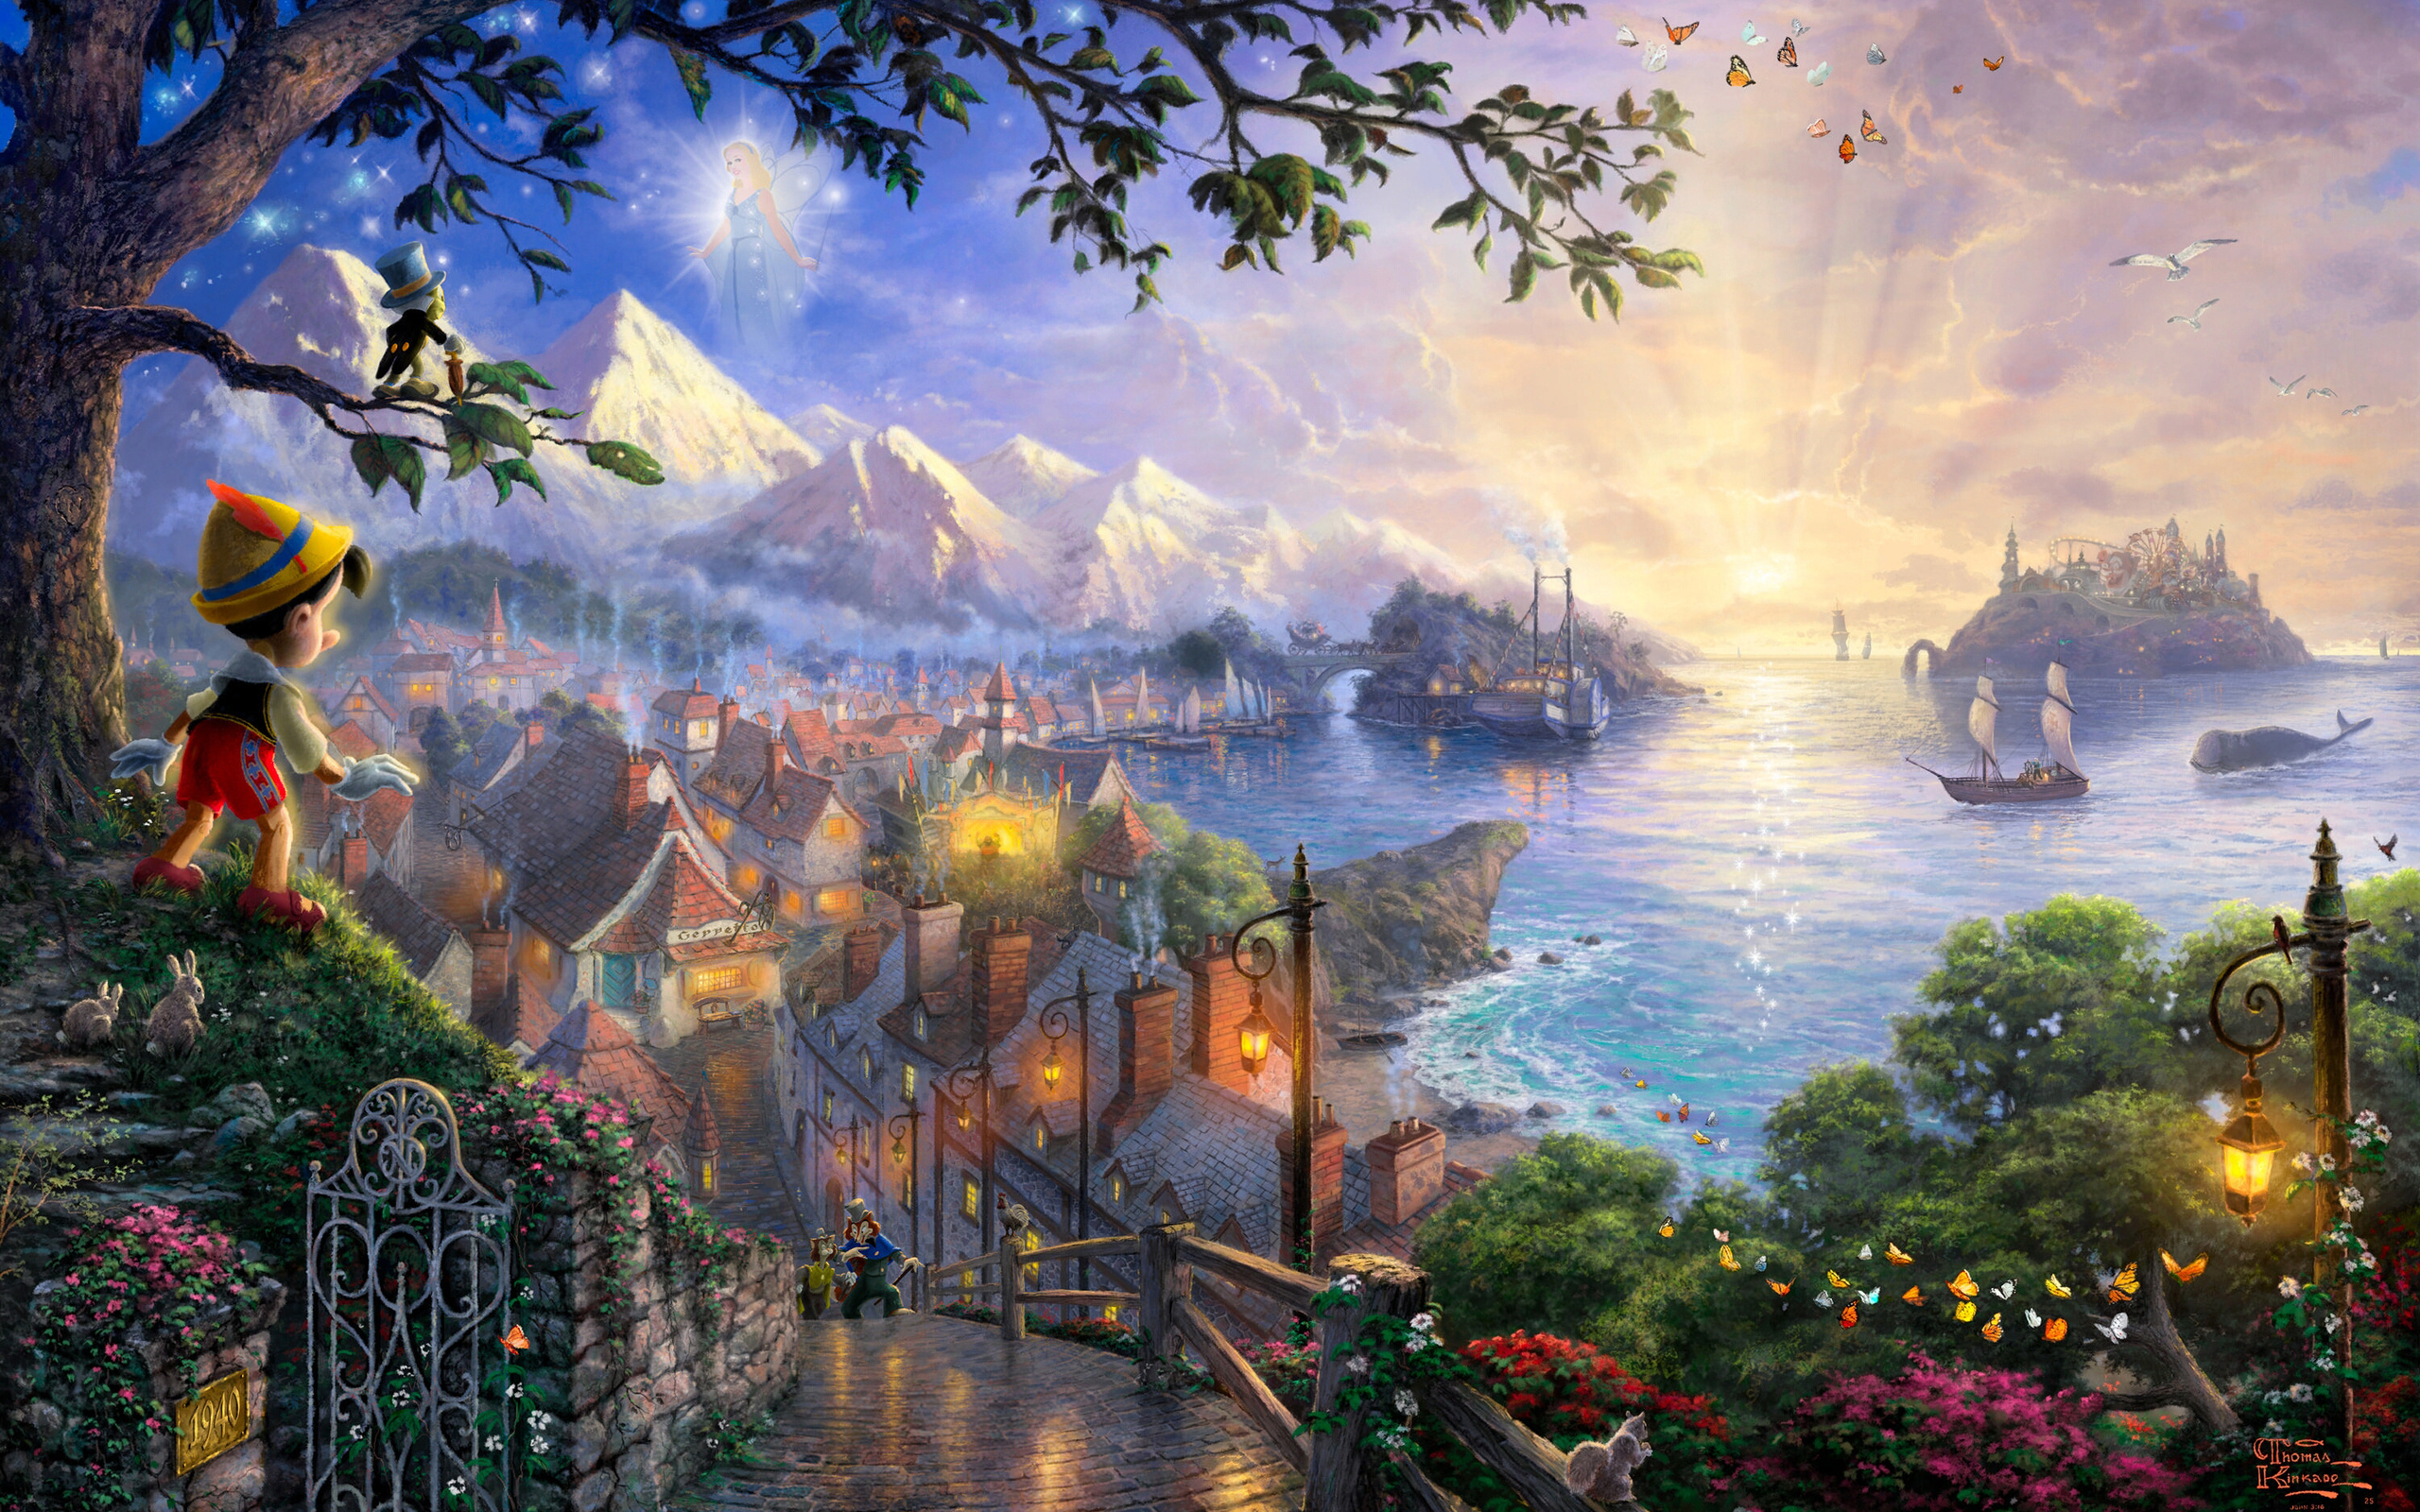 Thomas kinkade, 50-th anniversary, pinocchio wishes upon a star, art, the disney dreams collection